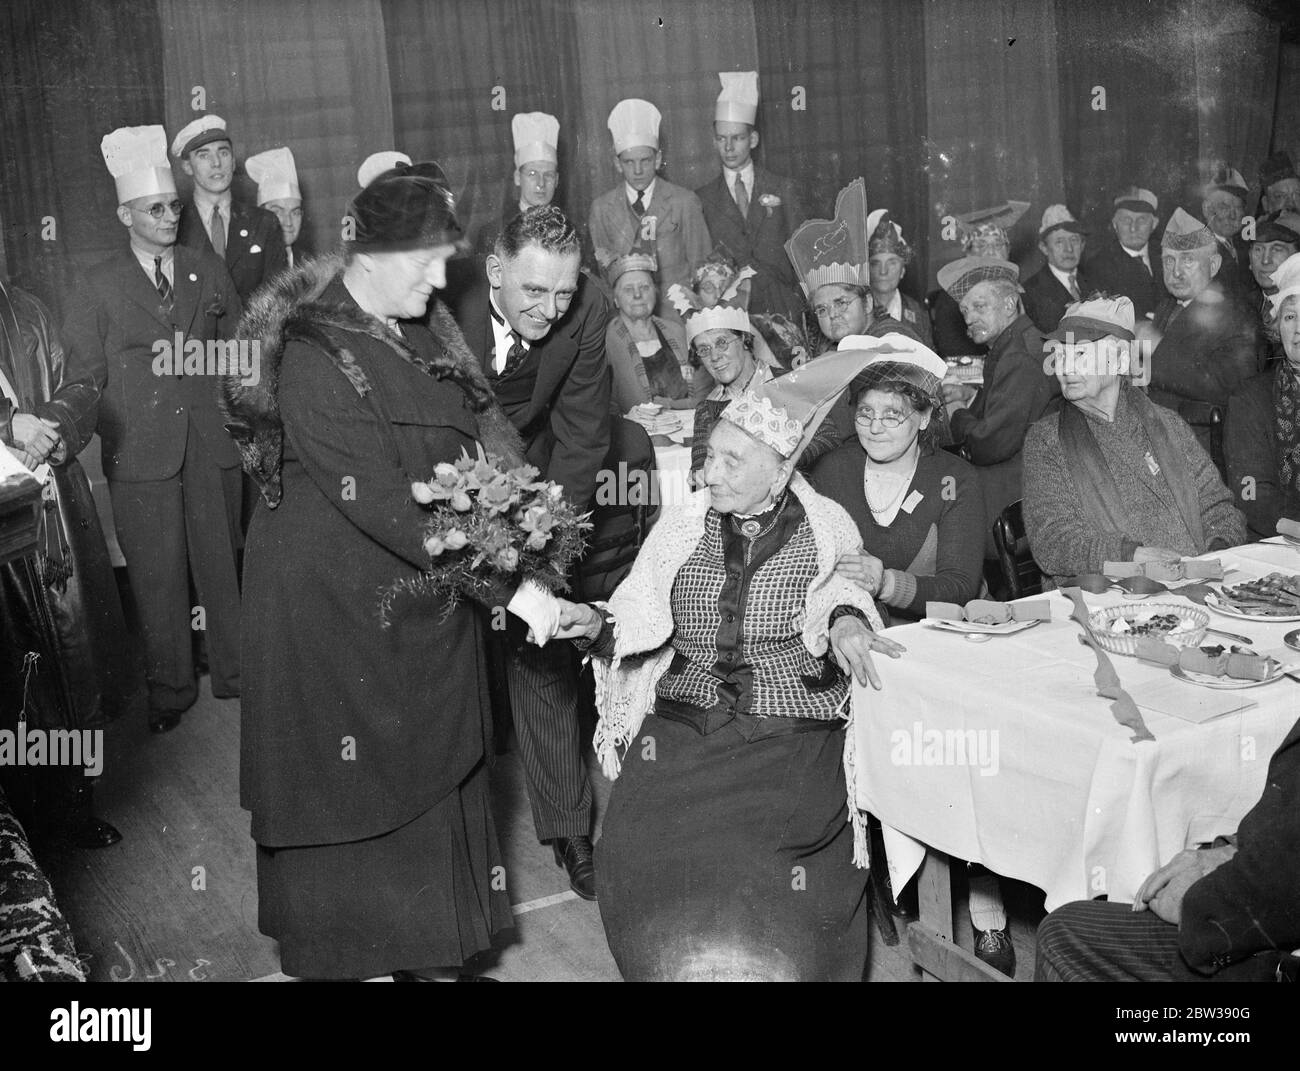 Hornsey ' s oldest inhabitant presents bouquet to Lady Mayoress . The oldest inhabitants in the district were entertained to tea at the Hornsey , London . YMCA - the Lady Mayoress of London , Lady Collett , attended . Photo shows ; Hornsey ' s oldest woman resident , Miss Mary Ashley , aged 99 , presenting a bouquet to the Lady Mayoress . 13 January 1934 30s, 30's, 1930s, 1930's, thirties, nineteen thirties Stock Photo